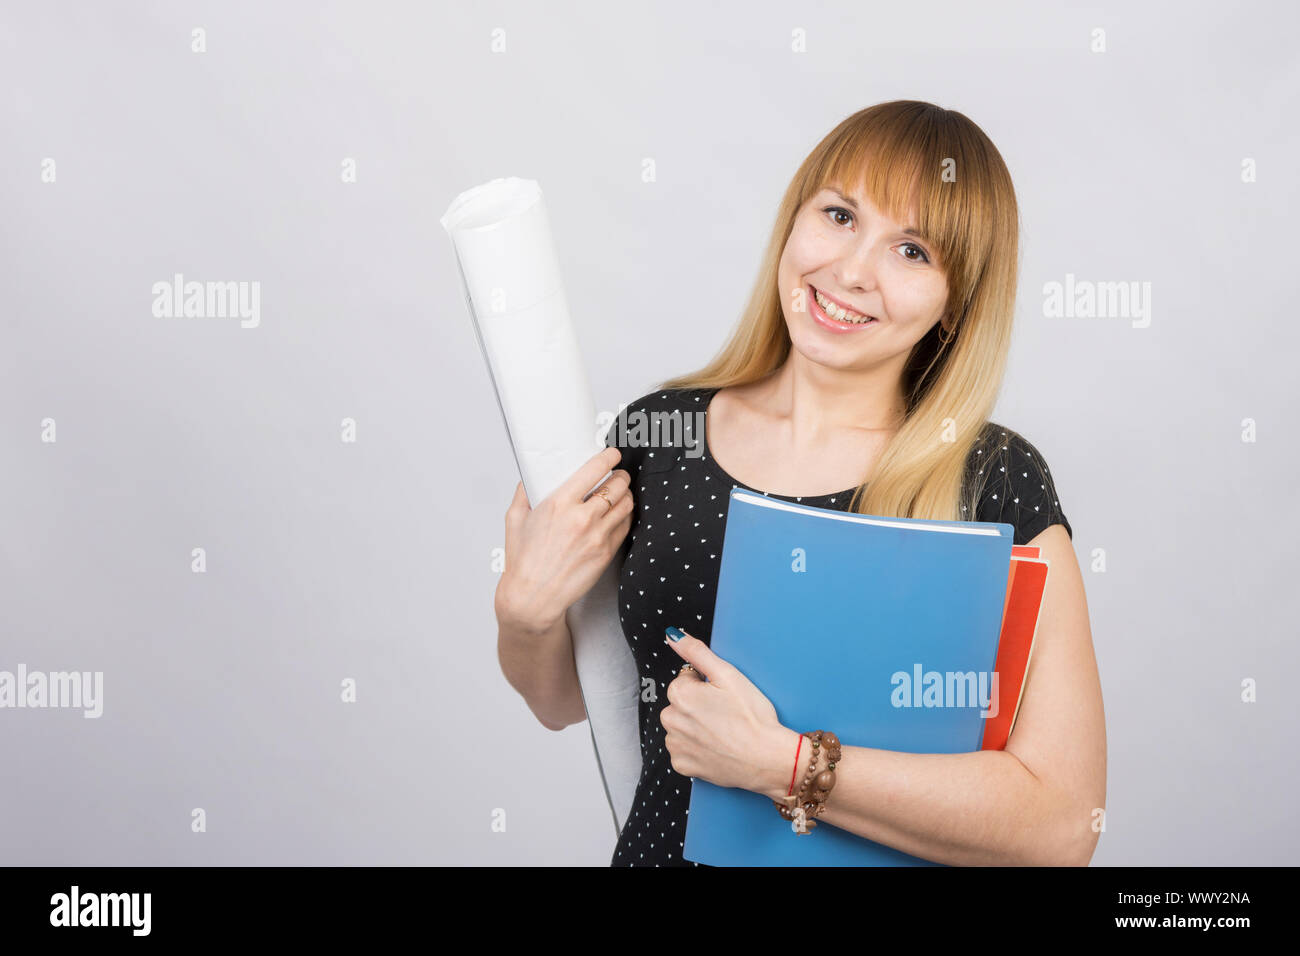 Girl student smiling and holding blueprints and a folder with documents Stock Photo